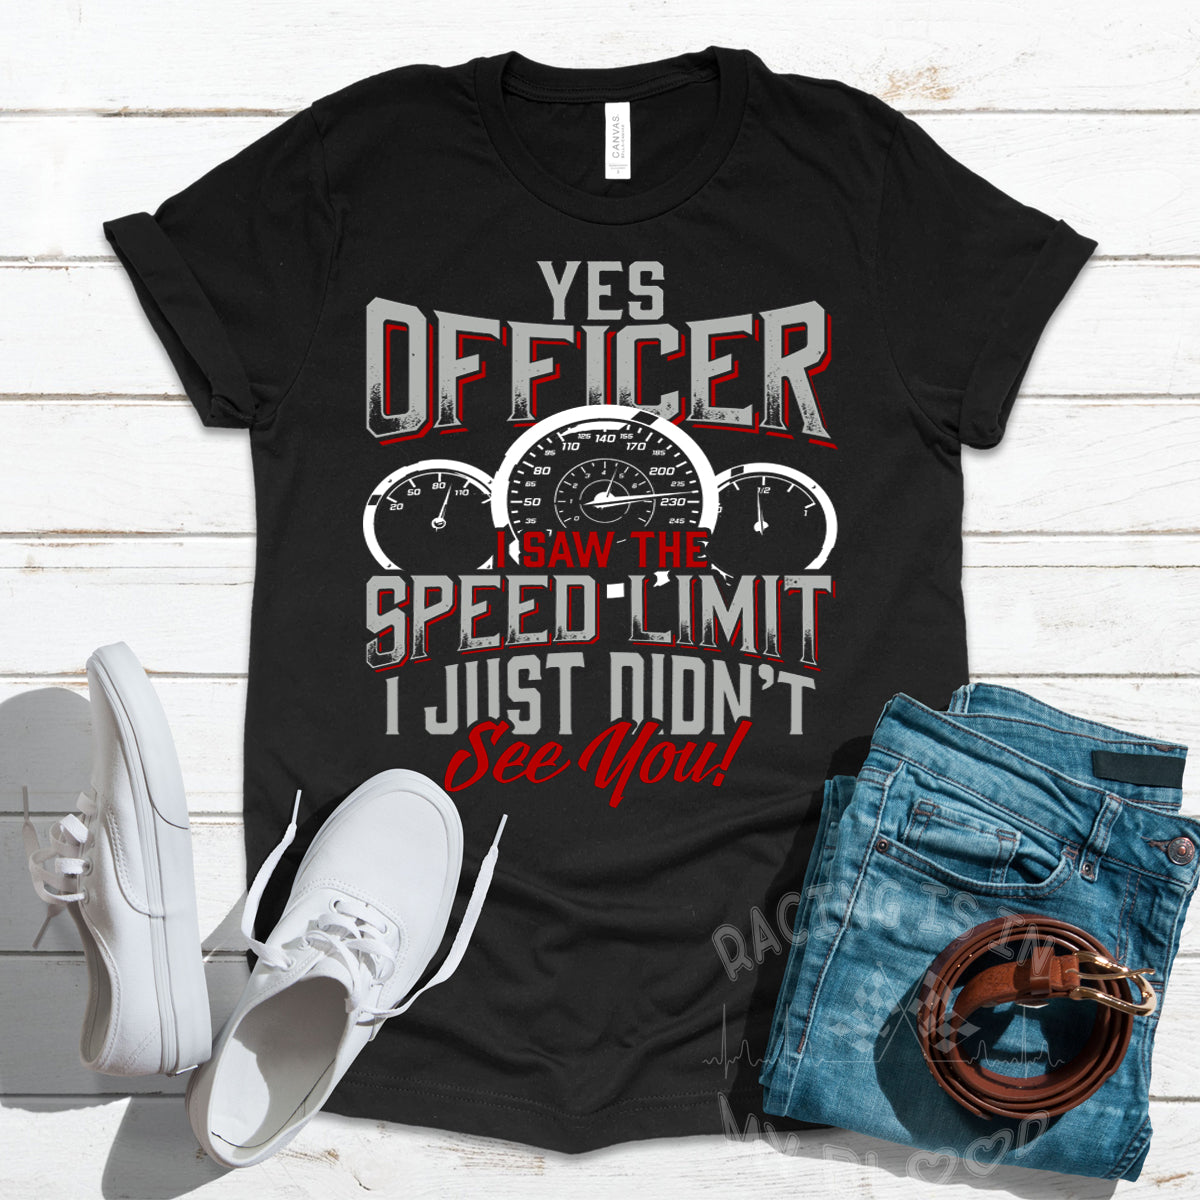 Yes Officer I Saw The Speed Limit I Just Didn't See You T-Shirts!